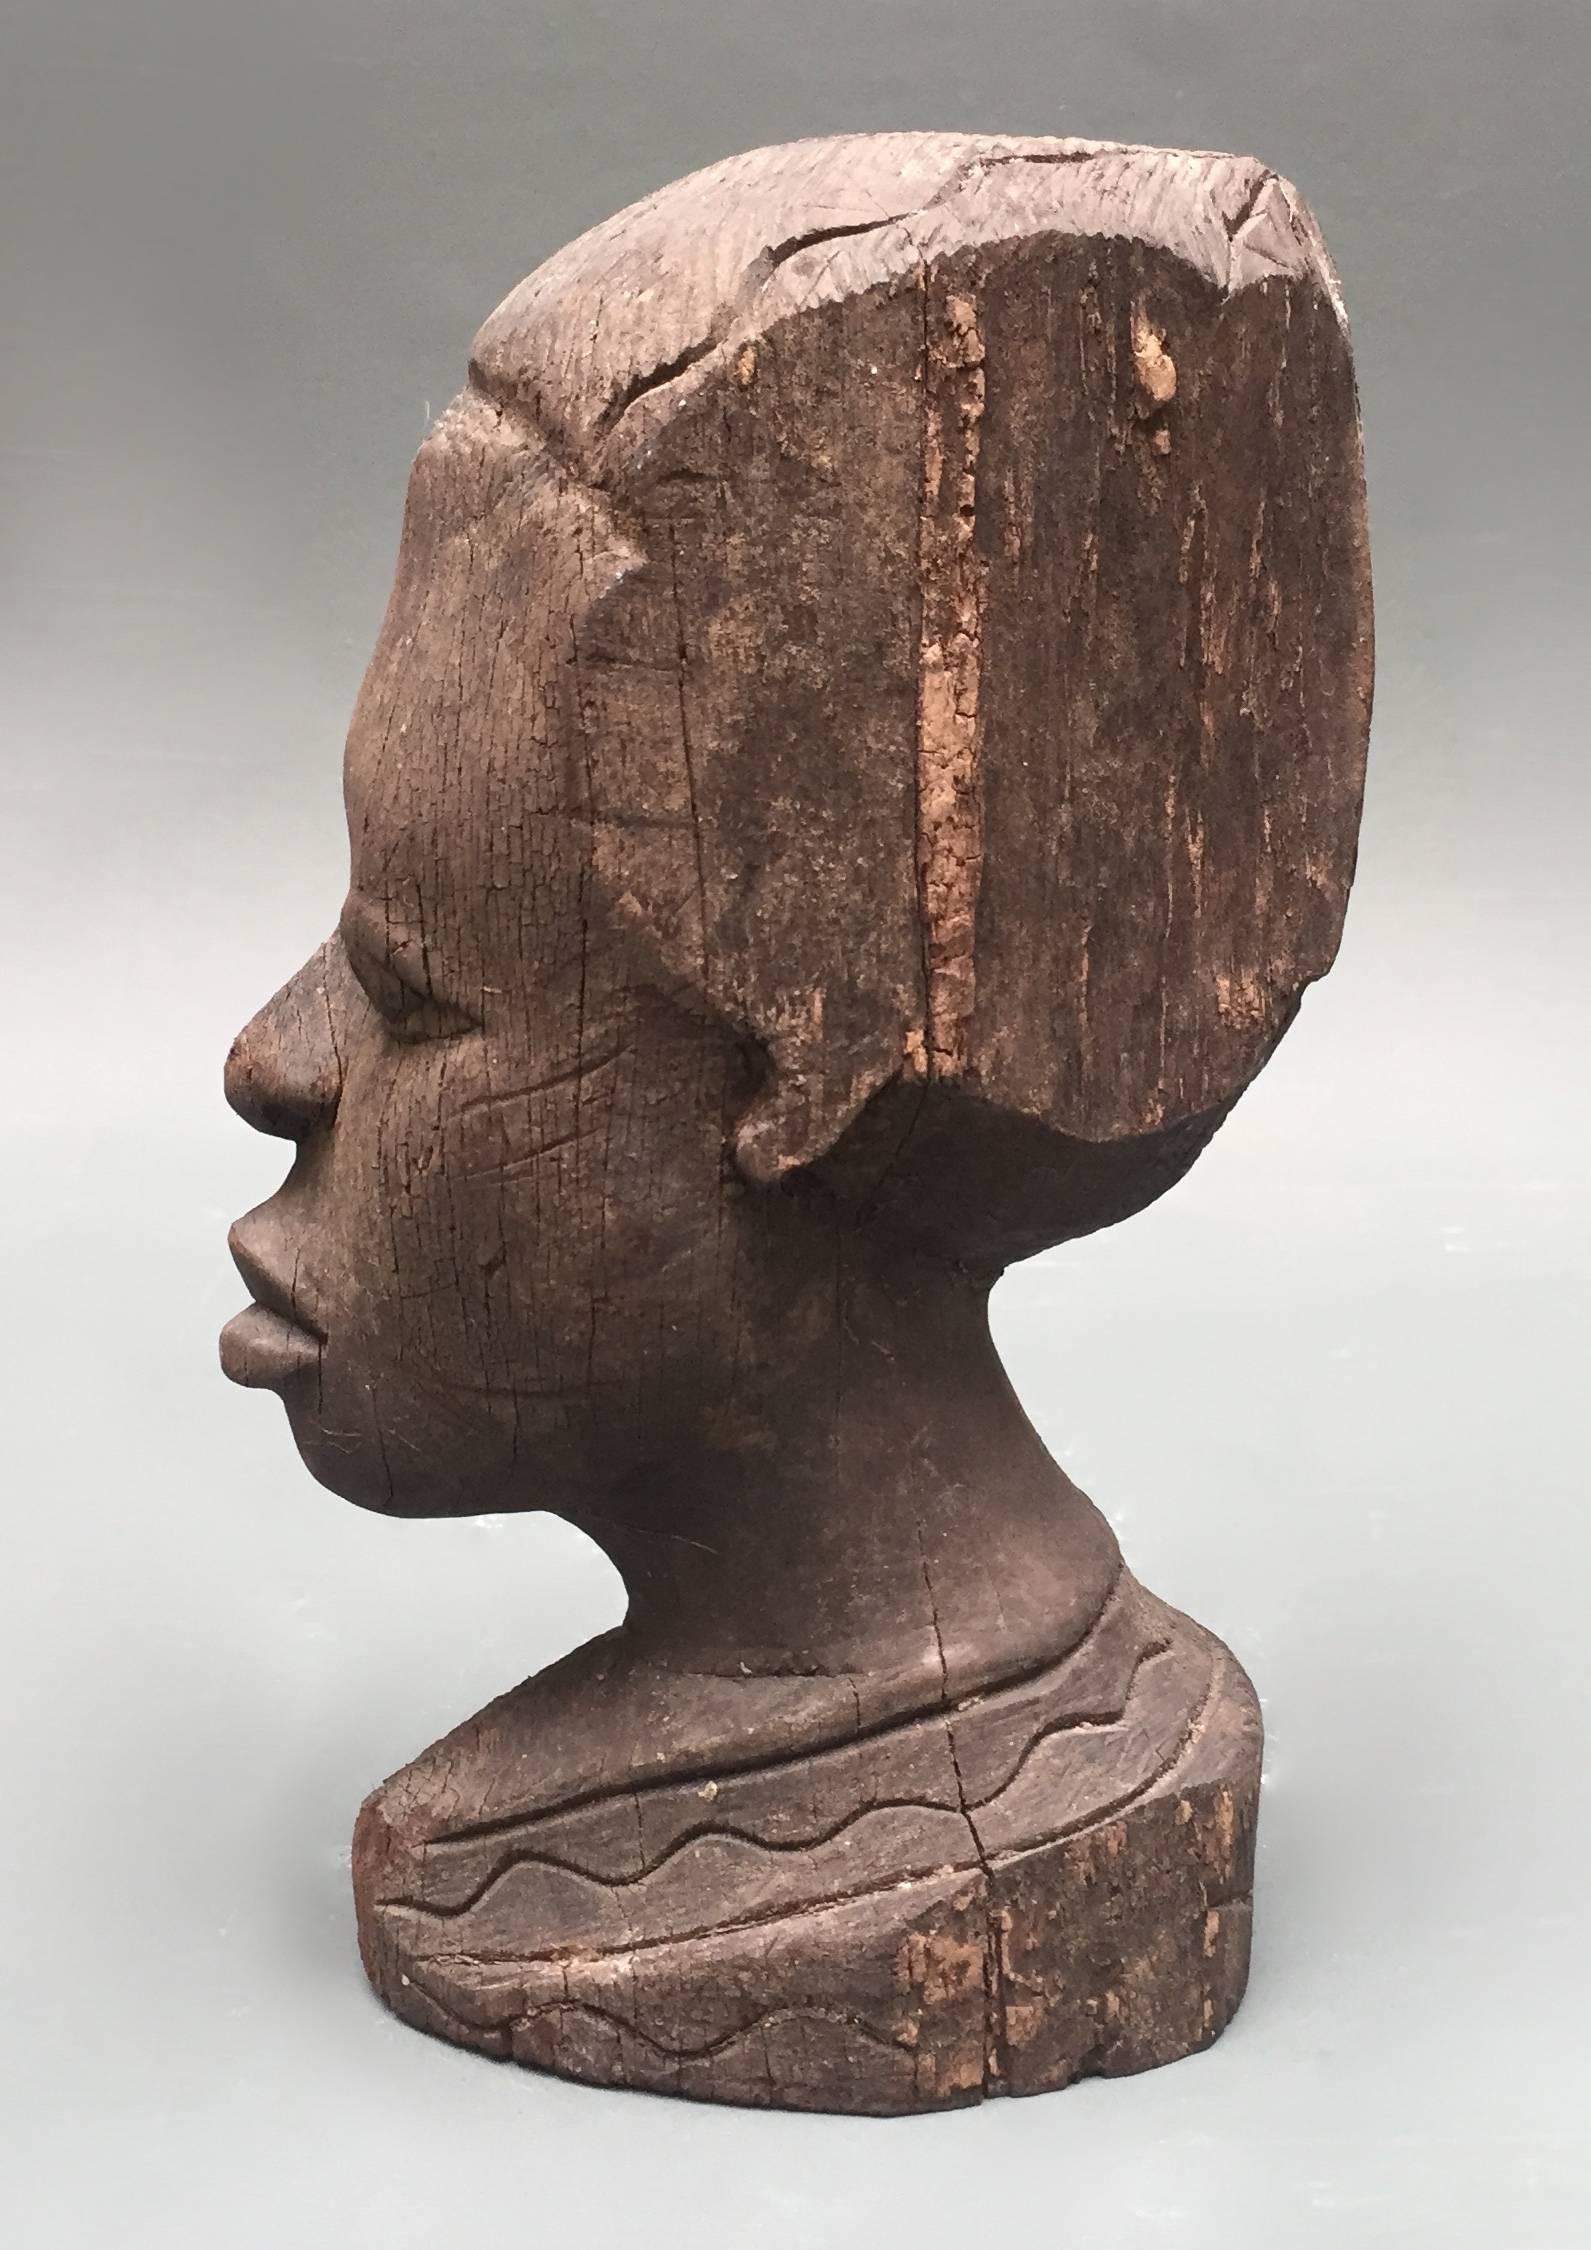 This bust comes from my own collection of vintage and antique heads. The primitive but skilled carving and the contours and cracks of the wood organically complement each other .The head is carved from a solid piece of very heavy wood and has a flat